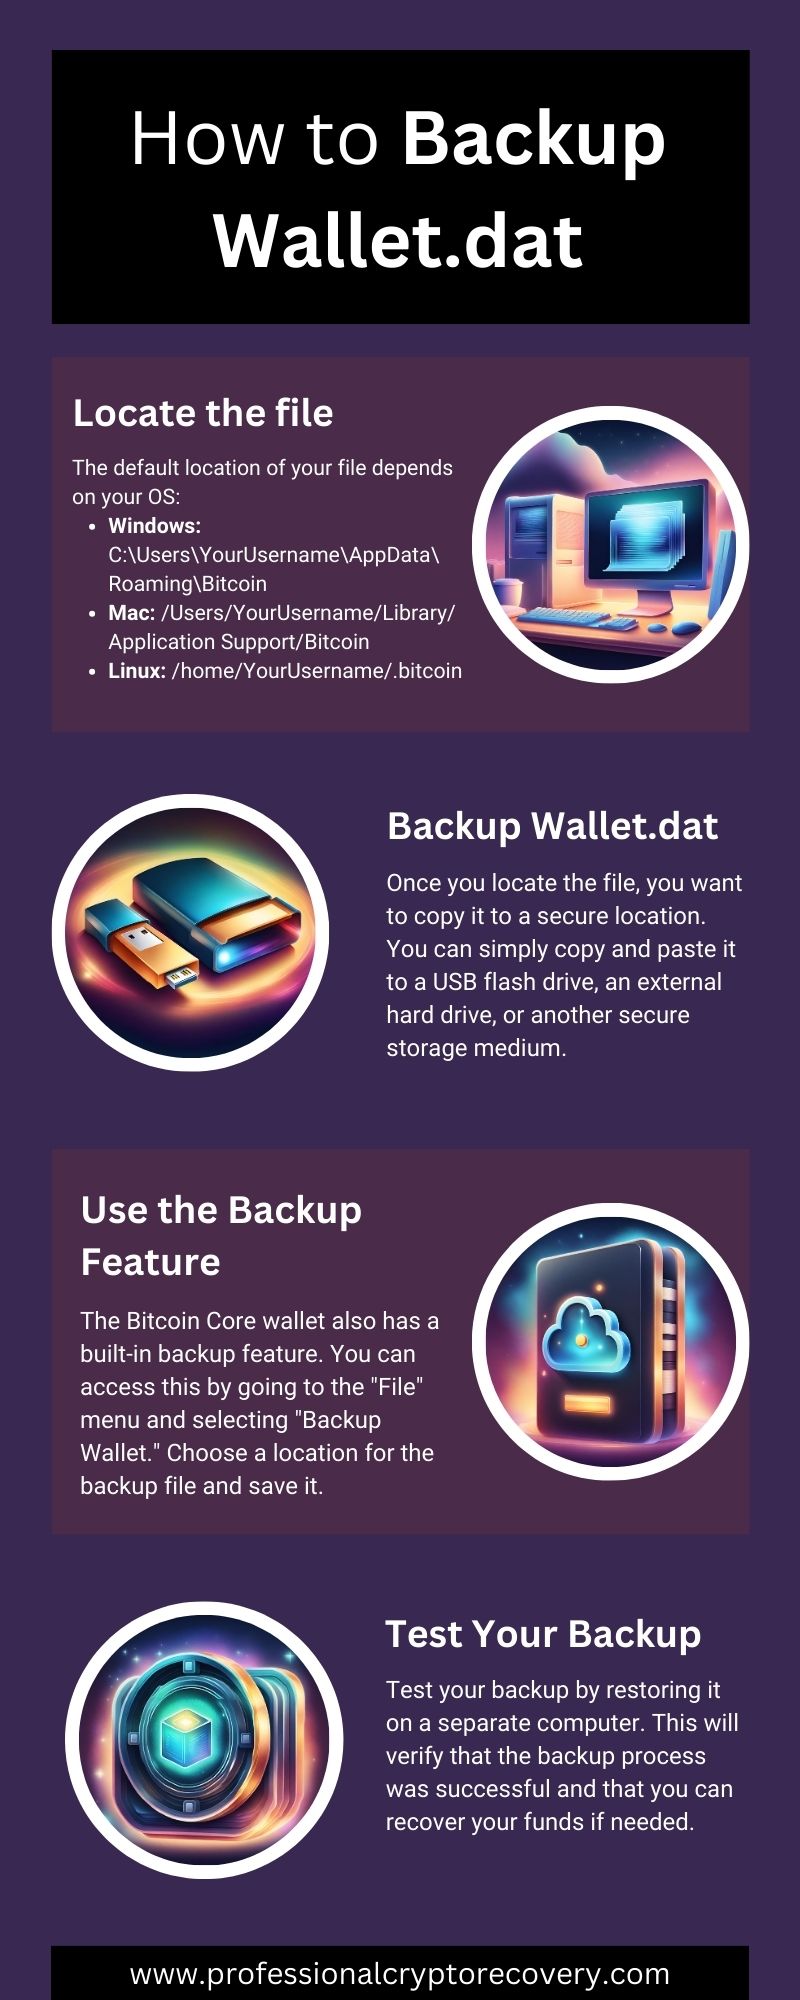 How To Backup Your Wallet.dat File